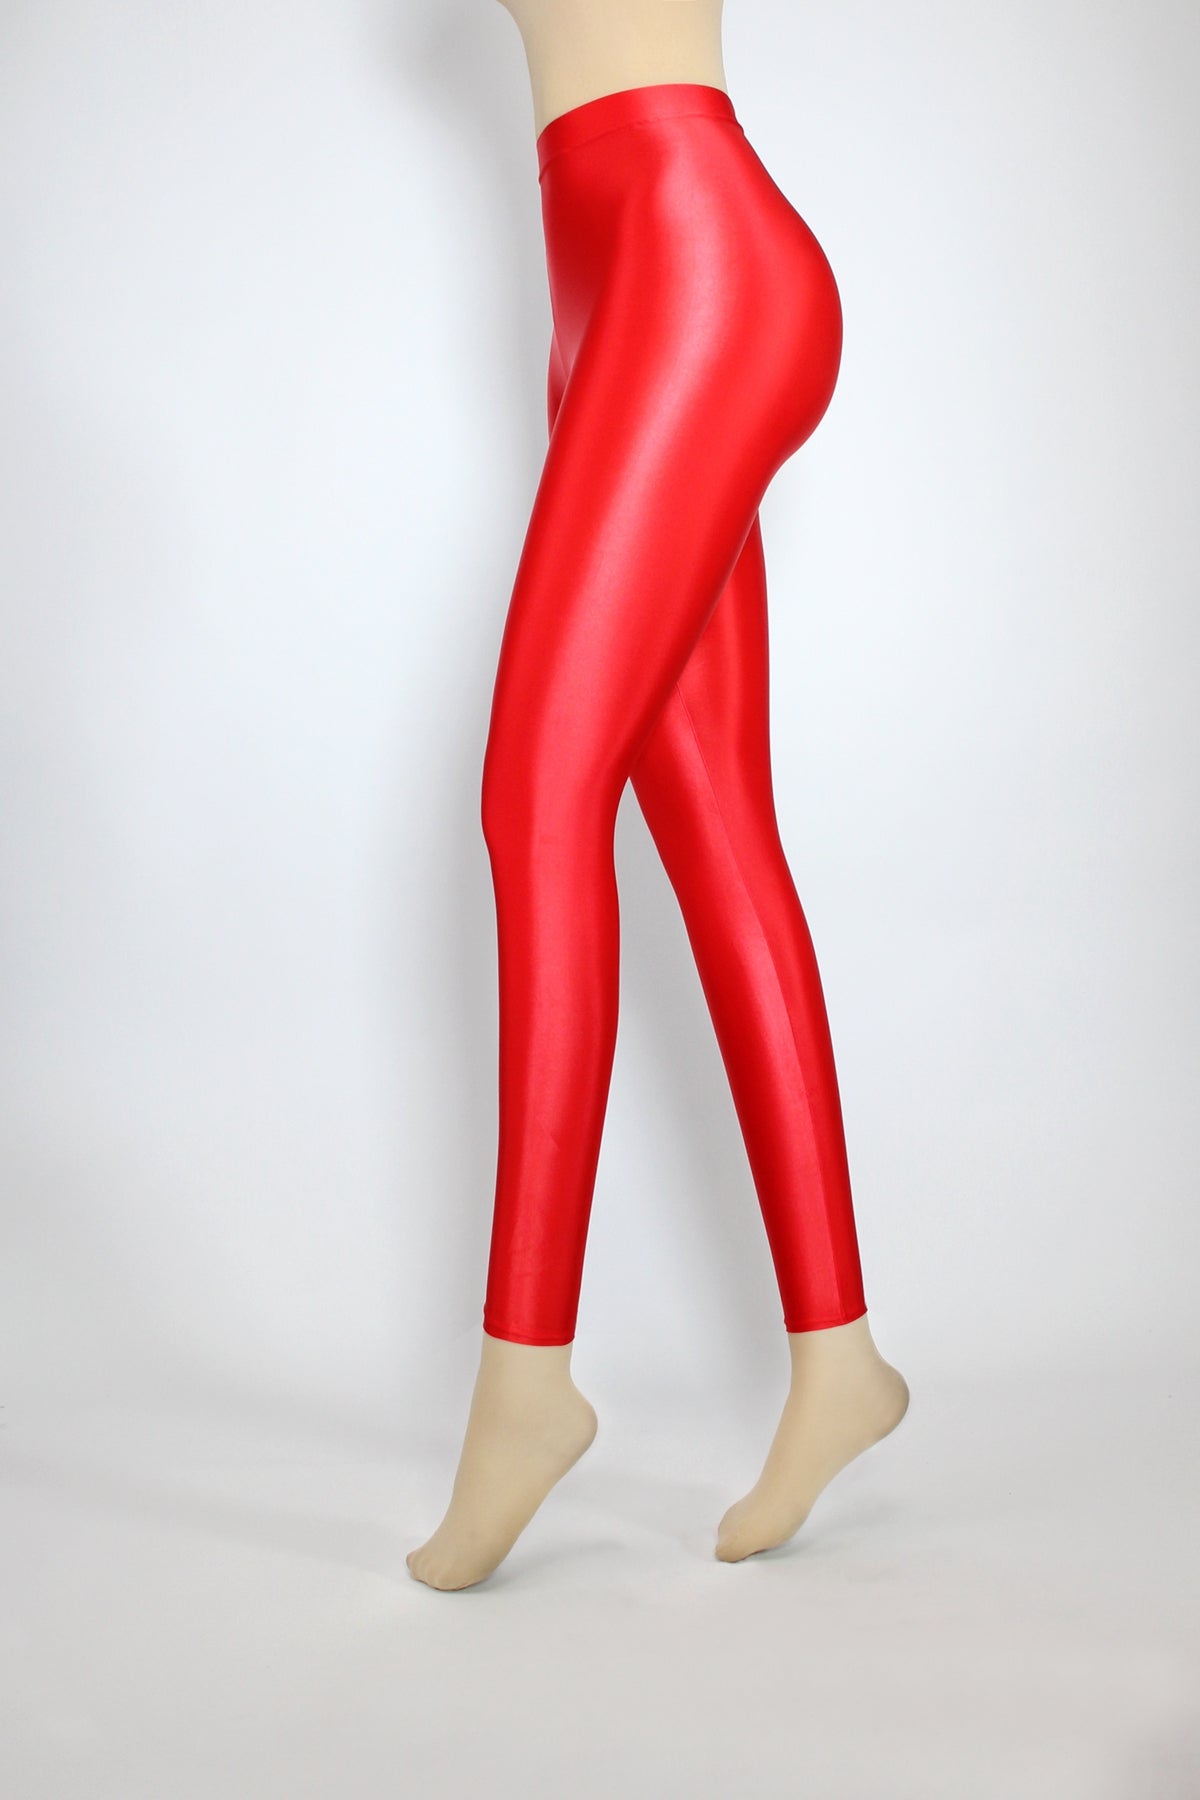 Spandex/lycra Leggings 15 Colors Mid Waist Tight Sexy Stocking Pantyhose -   Canada